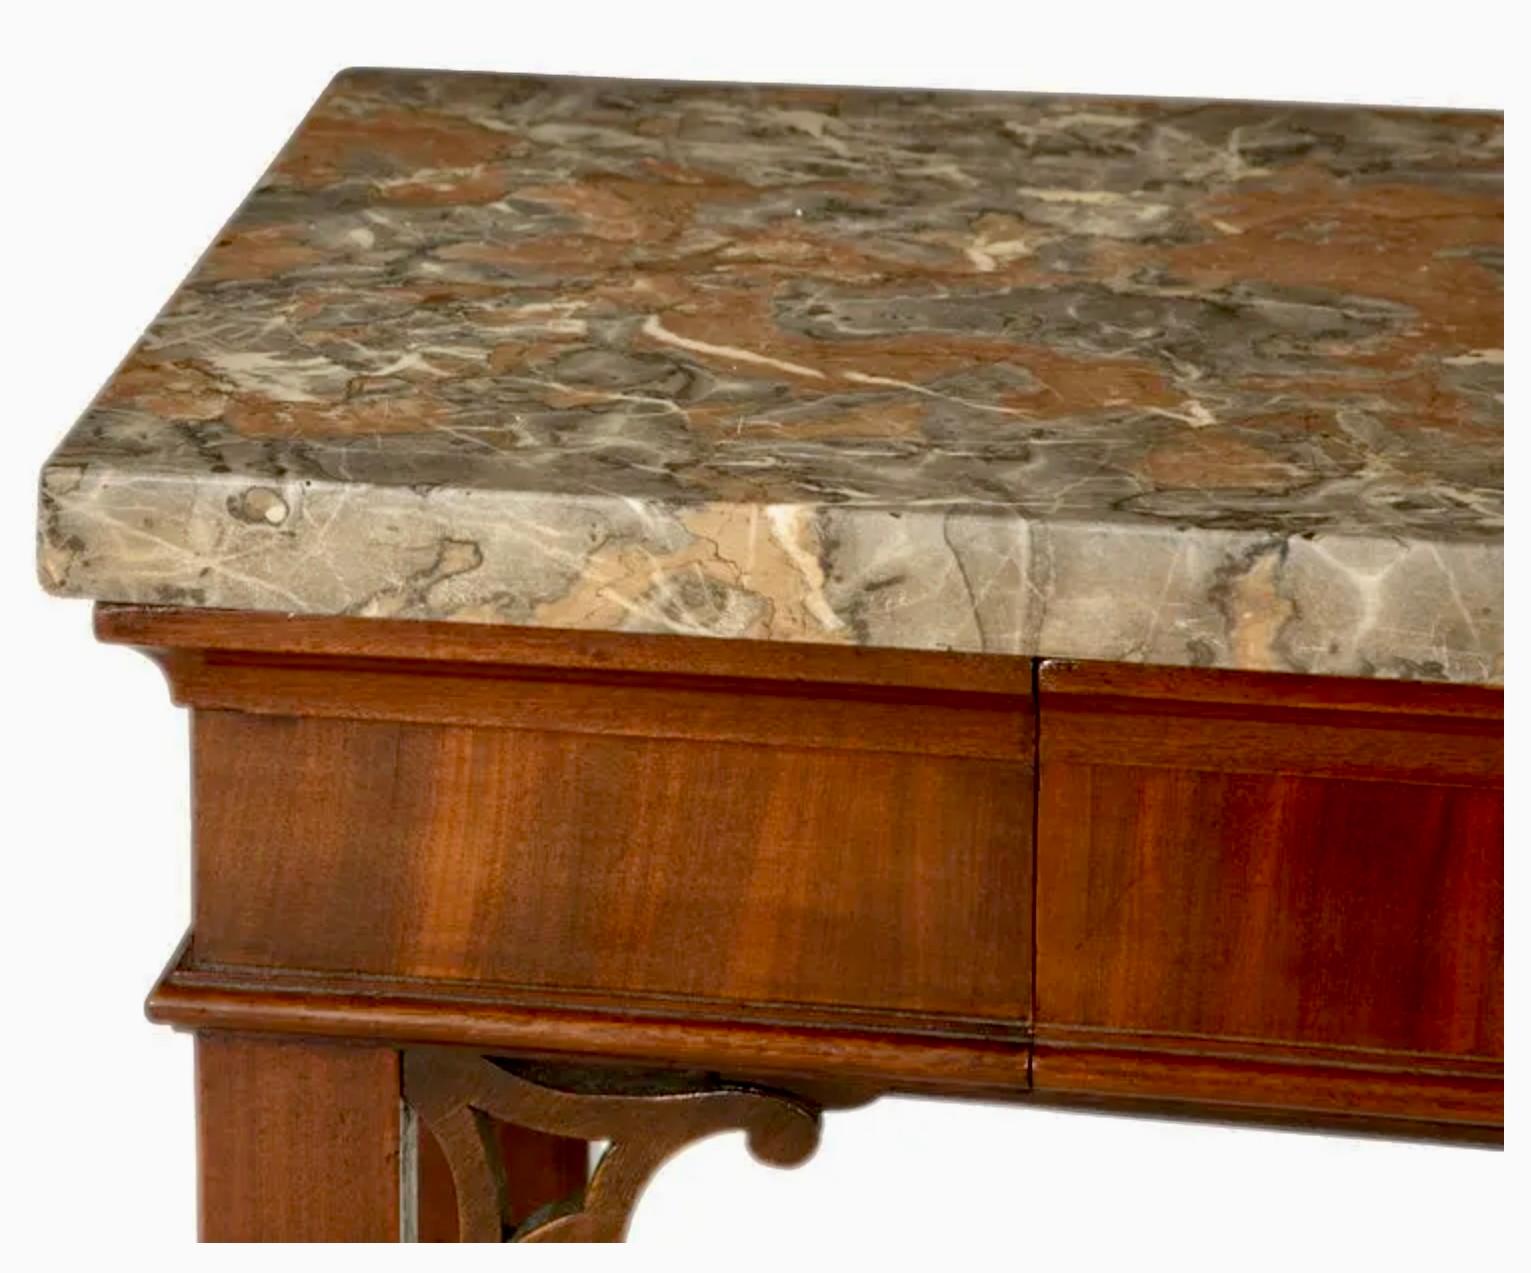 Exceptional circa 1760 Georgian Chippendale mahogany slab or side table with breccia marble top and a single central drawer. 

